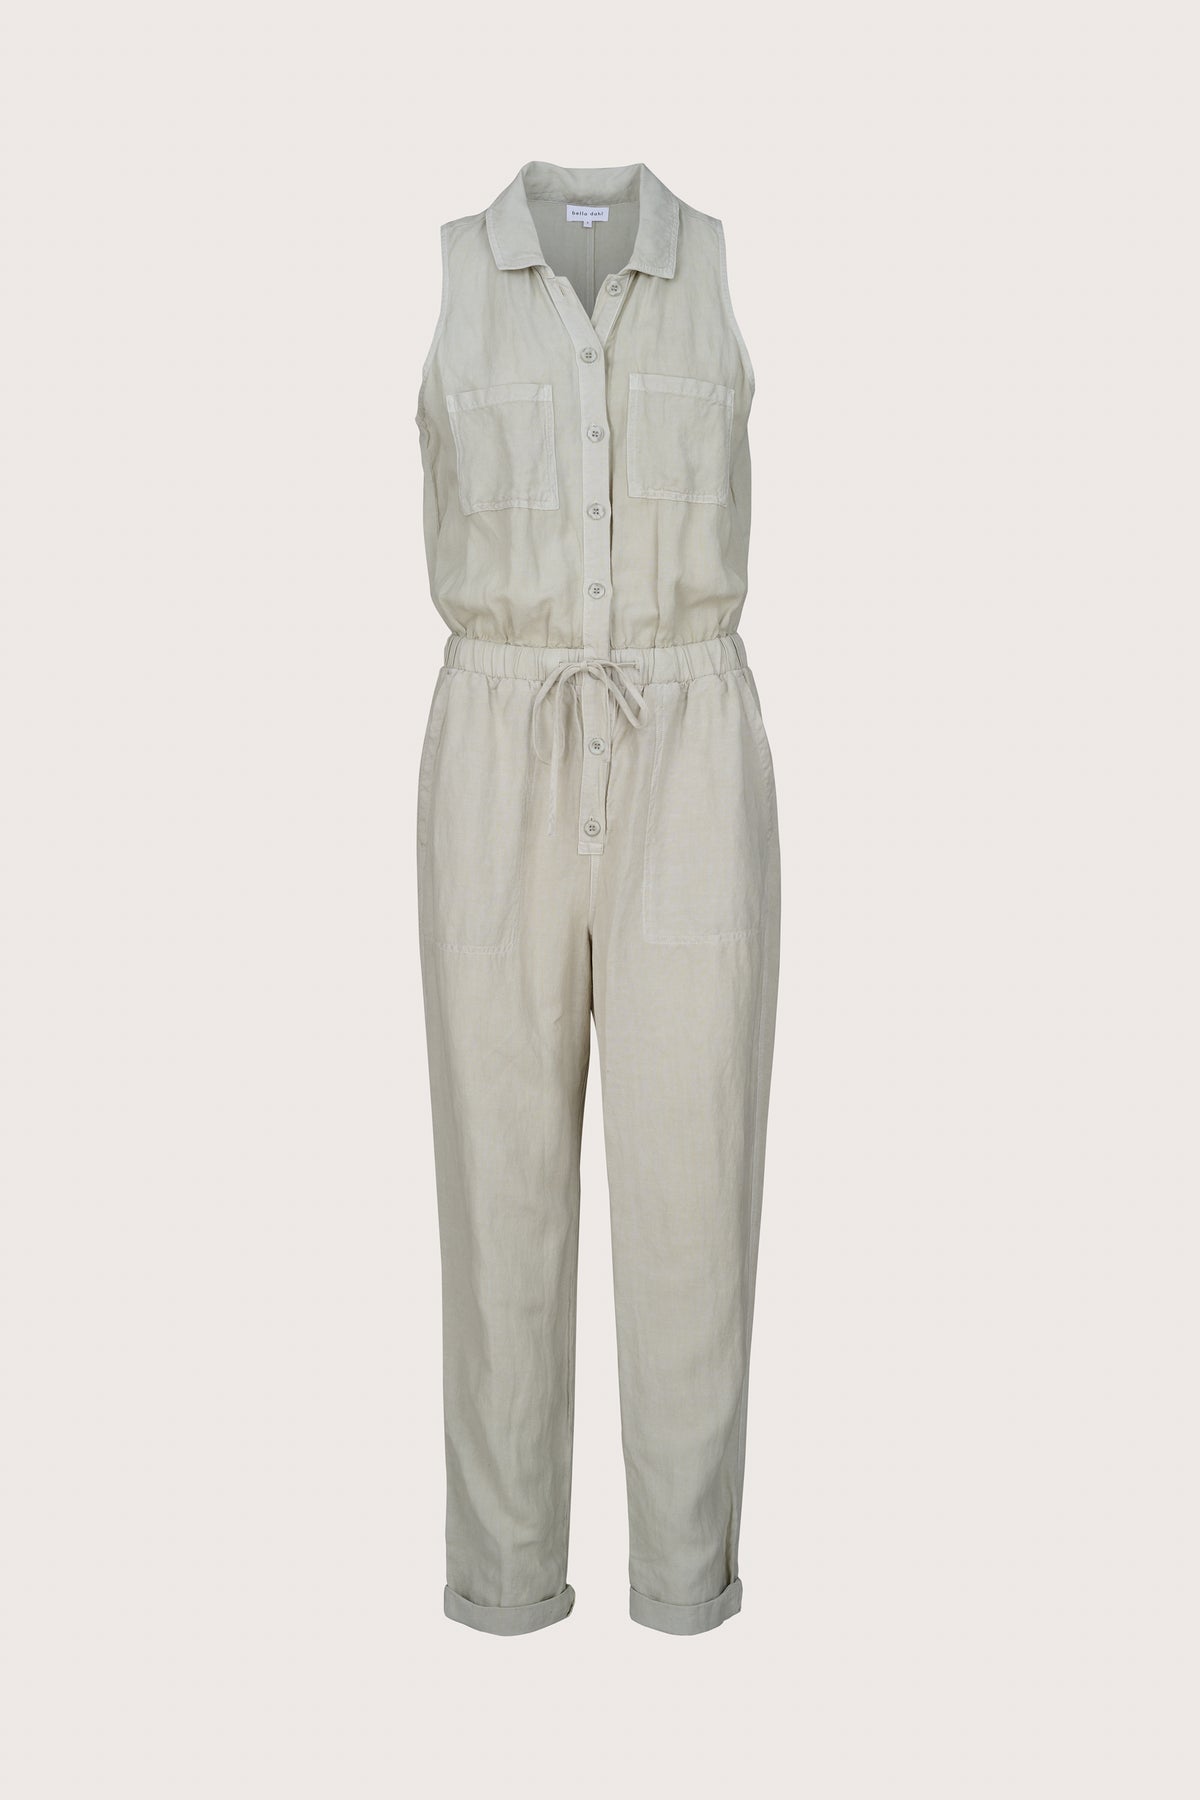 Sleeveless linen blend jumpsuit with a classic collar and drawstring waist